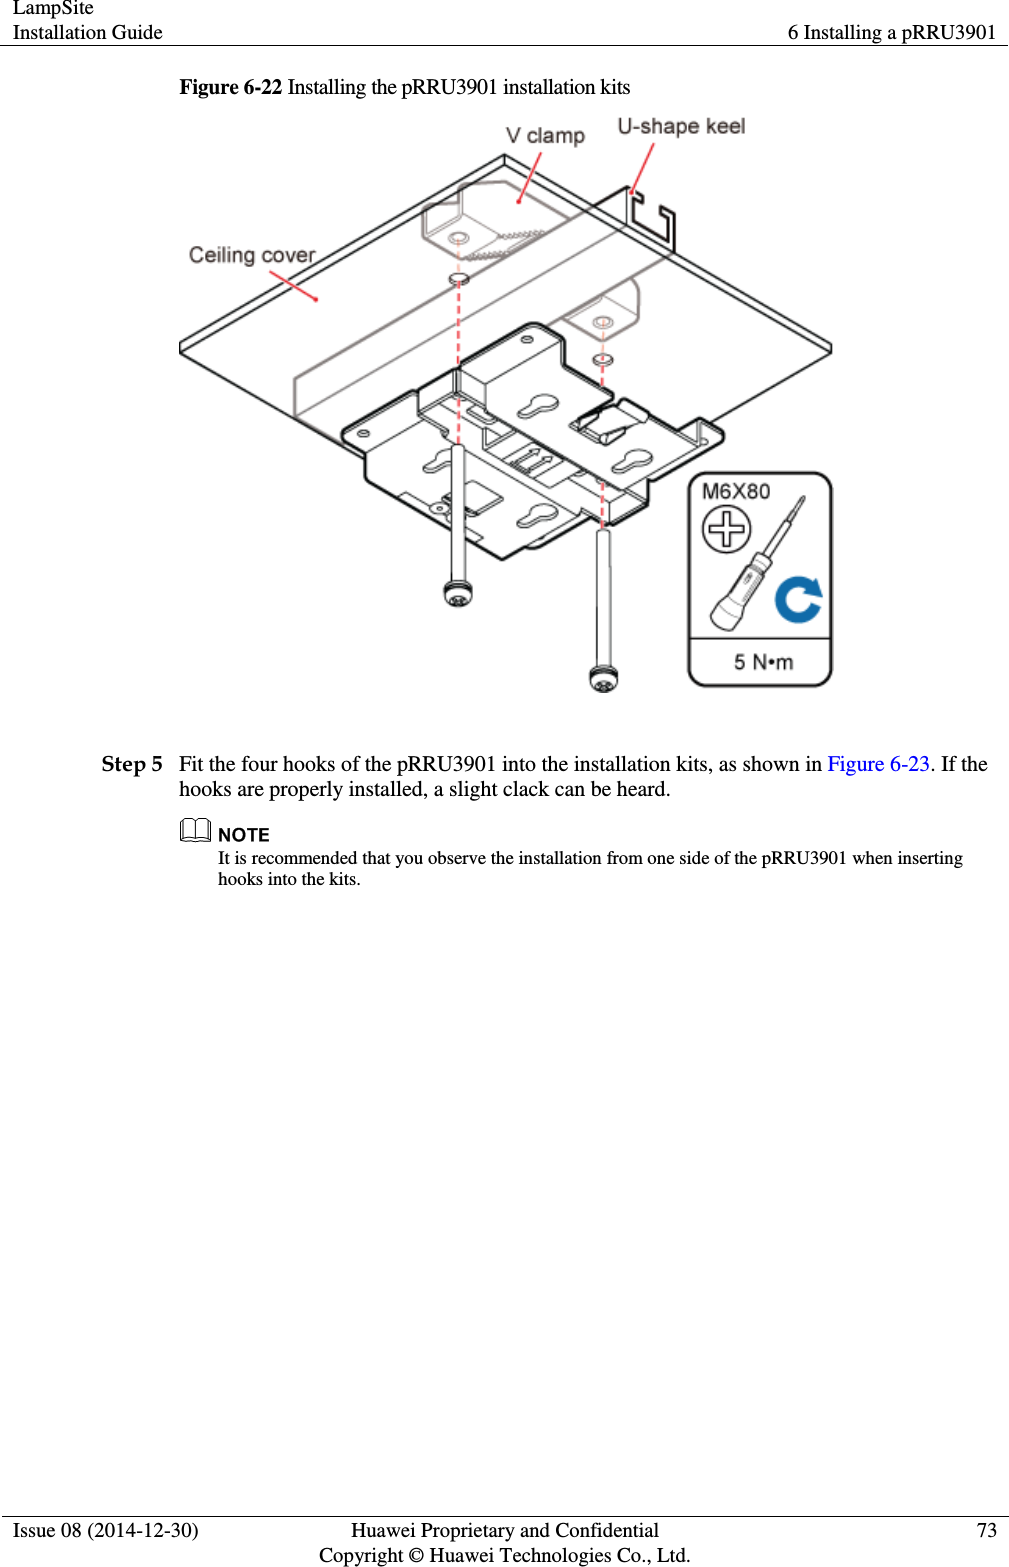 LampSite Installation Guide 6 Installing a pRRU3901  Issue 08 (2014-12-30) Huawei Proprietary and Confidential                                     Copyright © Huawei Technologies Co., Ltd. 73  Figure 6-22 Installing the pRRU3901 installation kits   Step 5 Fit the four hooks of the pRRU3901 into the installation kits, as shown in Figure 6-23. If the hooks are properly installed, a slight clack can be heard.  It is recommended that you observe the installation from one side of the pRRU3901 when inserting hooks into the kits. 